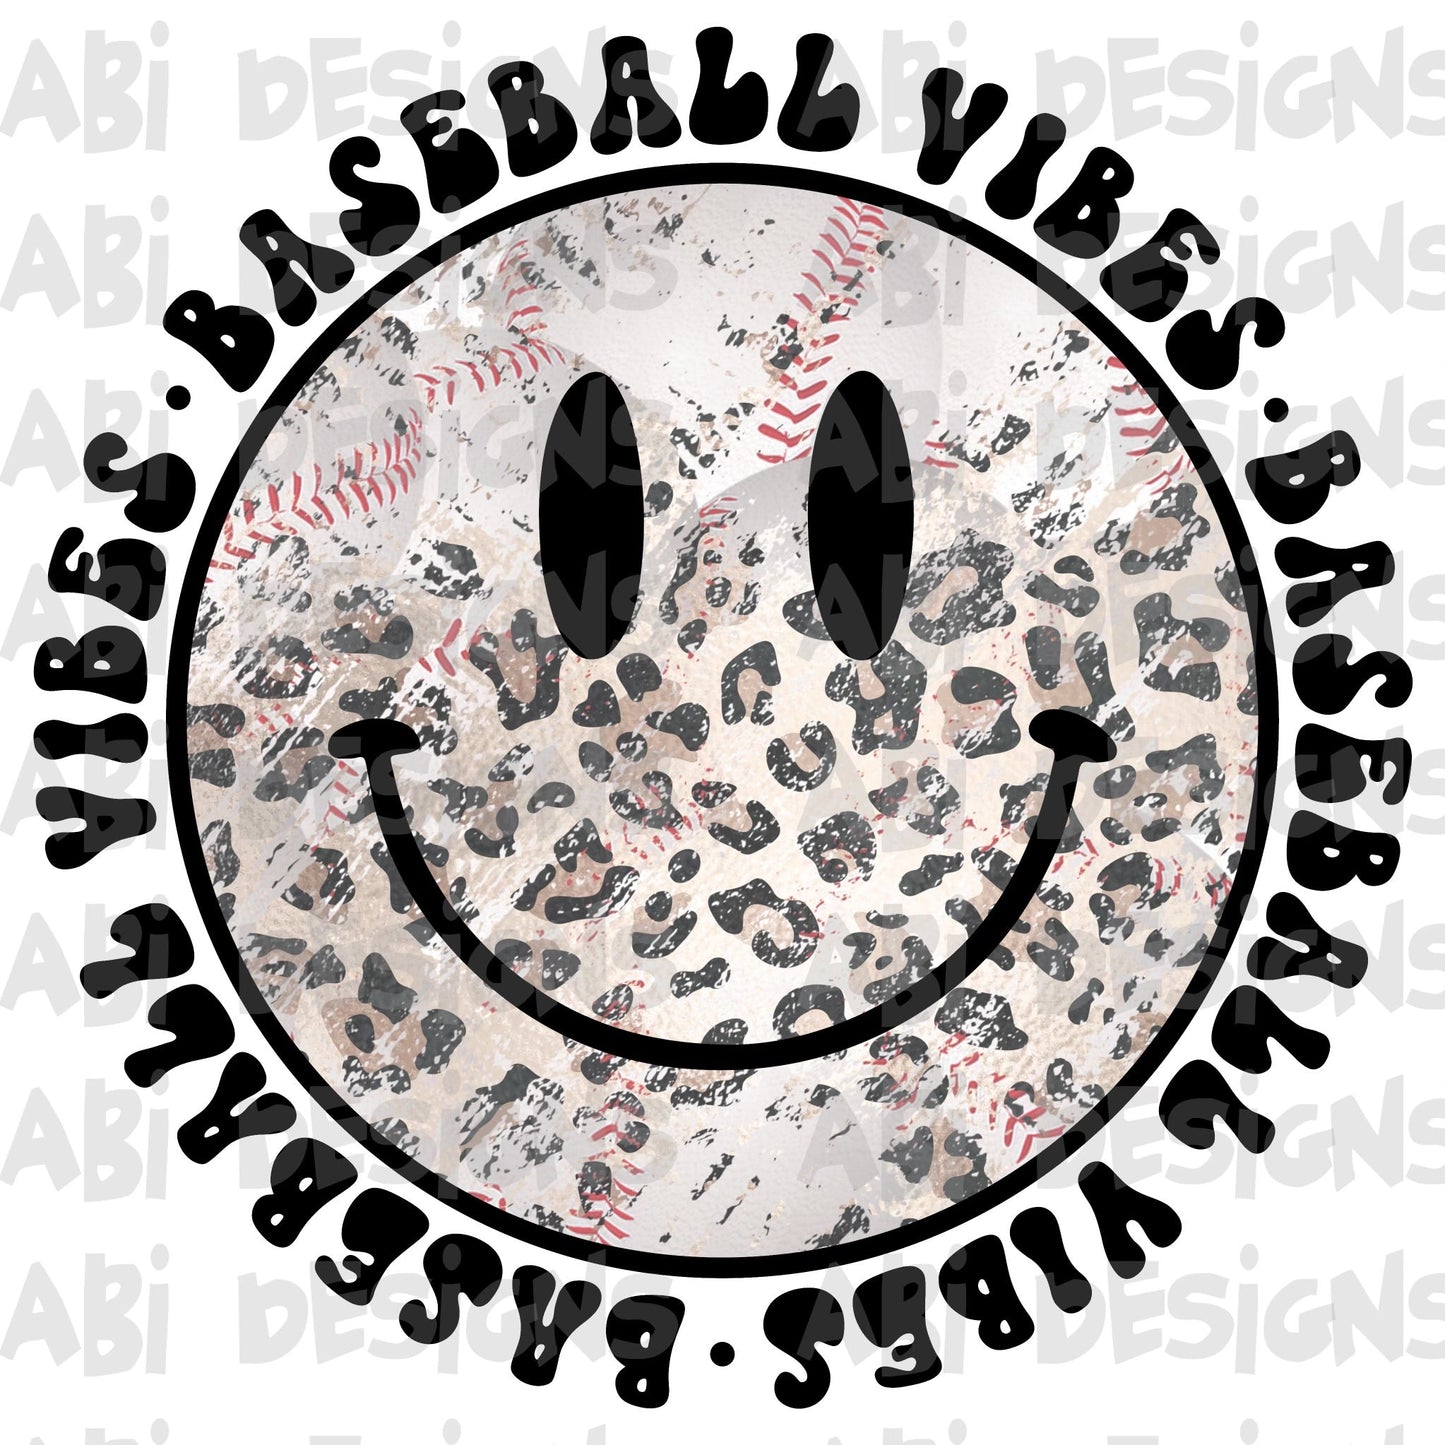 Baseball vibes Smiley face leopard - Sublimation